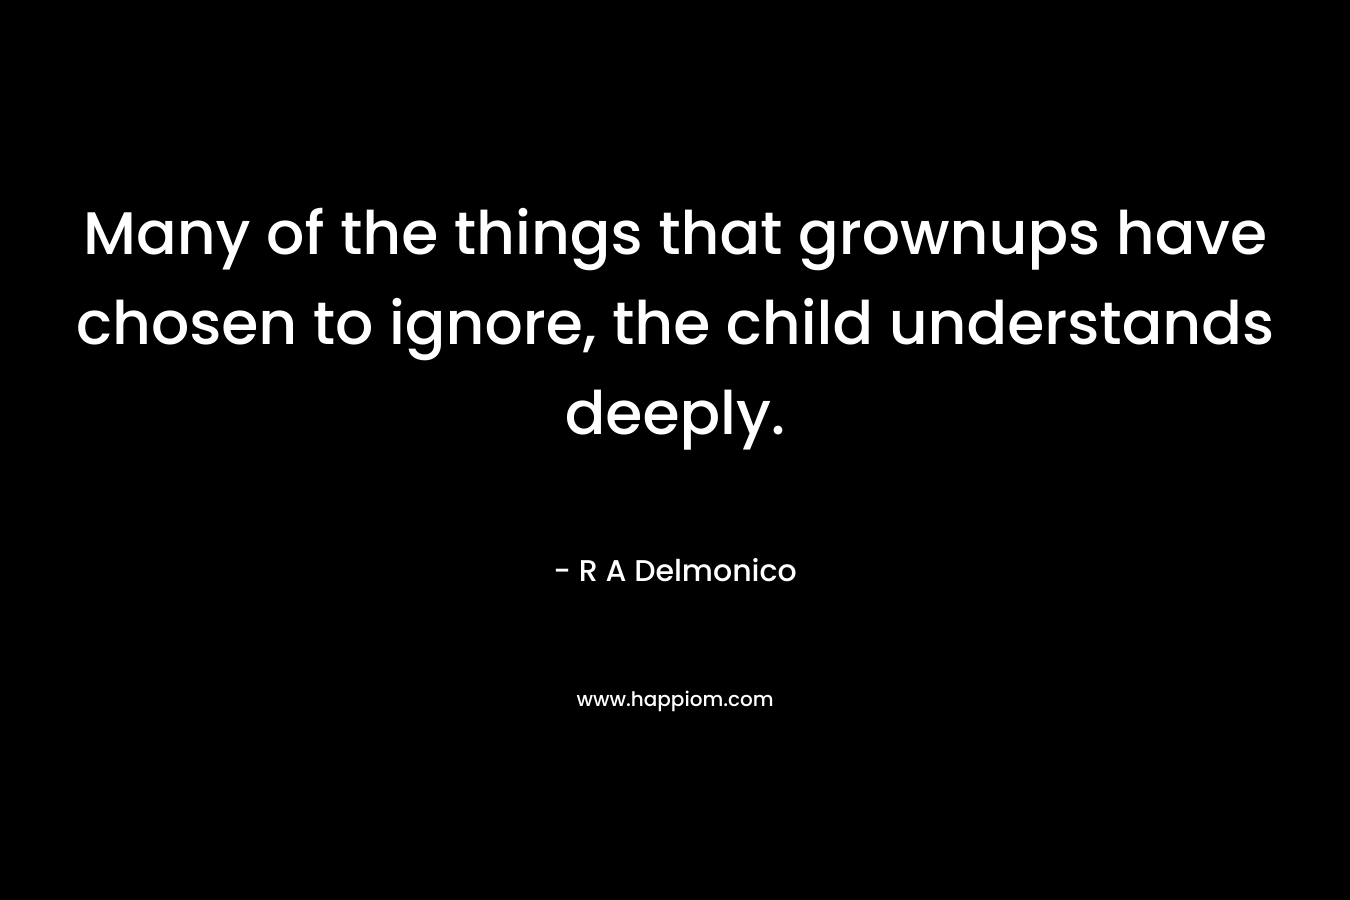 Many of the things that grownups have chosen to ignore, the child understands deeply.